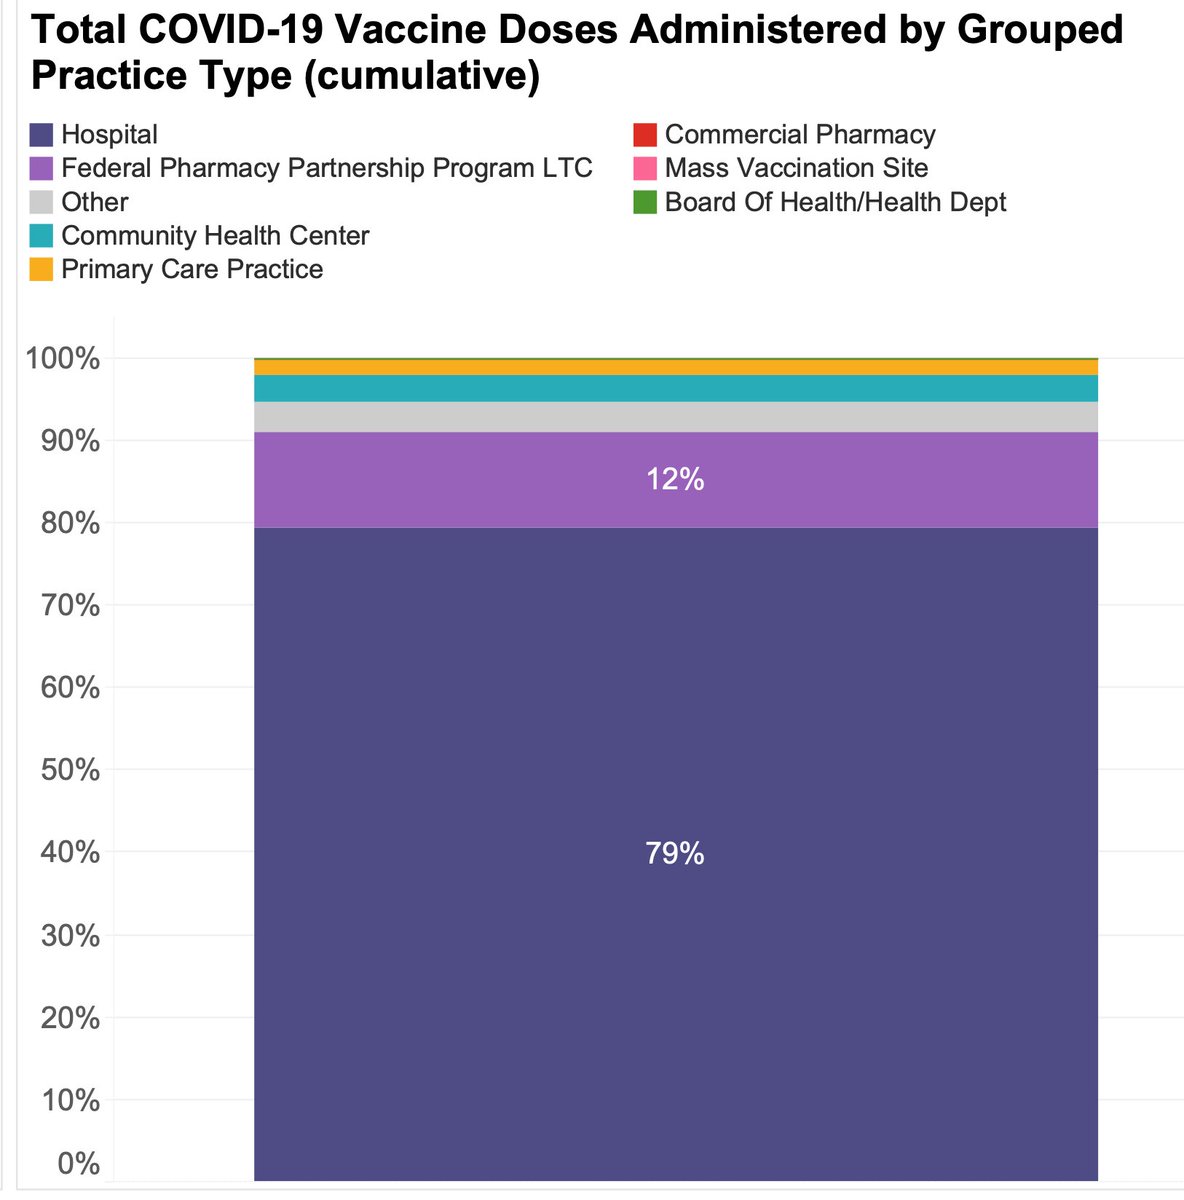 Primary care important for vax. Now, many primary care clinicians can’t even get vaccinated themselves! Data from MA shows gap. Deeper issue: We must fix US primary care system, in addition to fixing US public health system. More to come on this.  https://bit.ly/3oPK3wF  17/